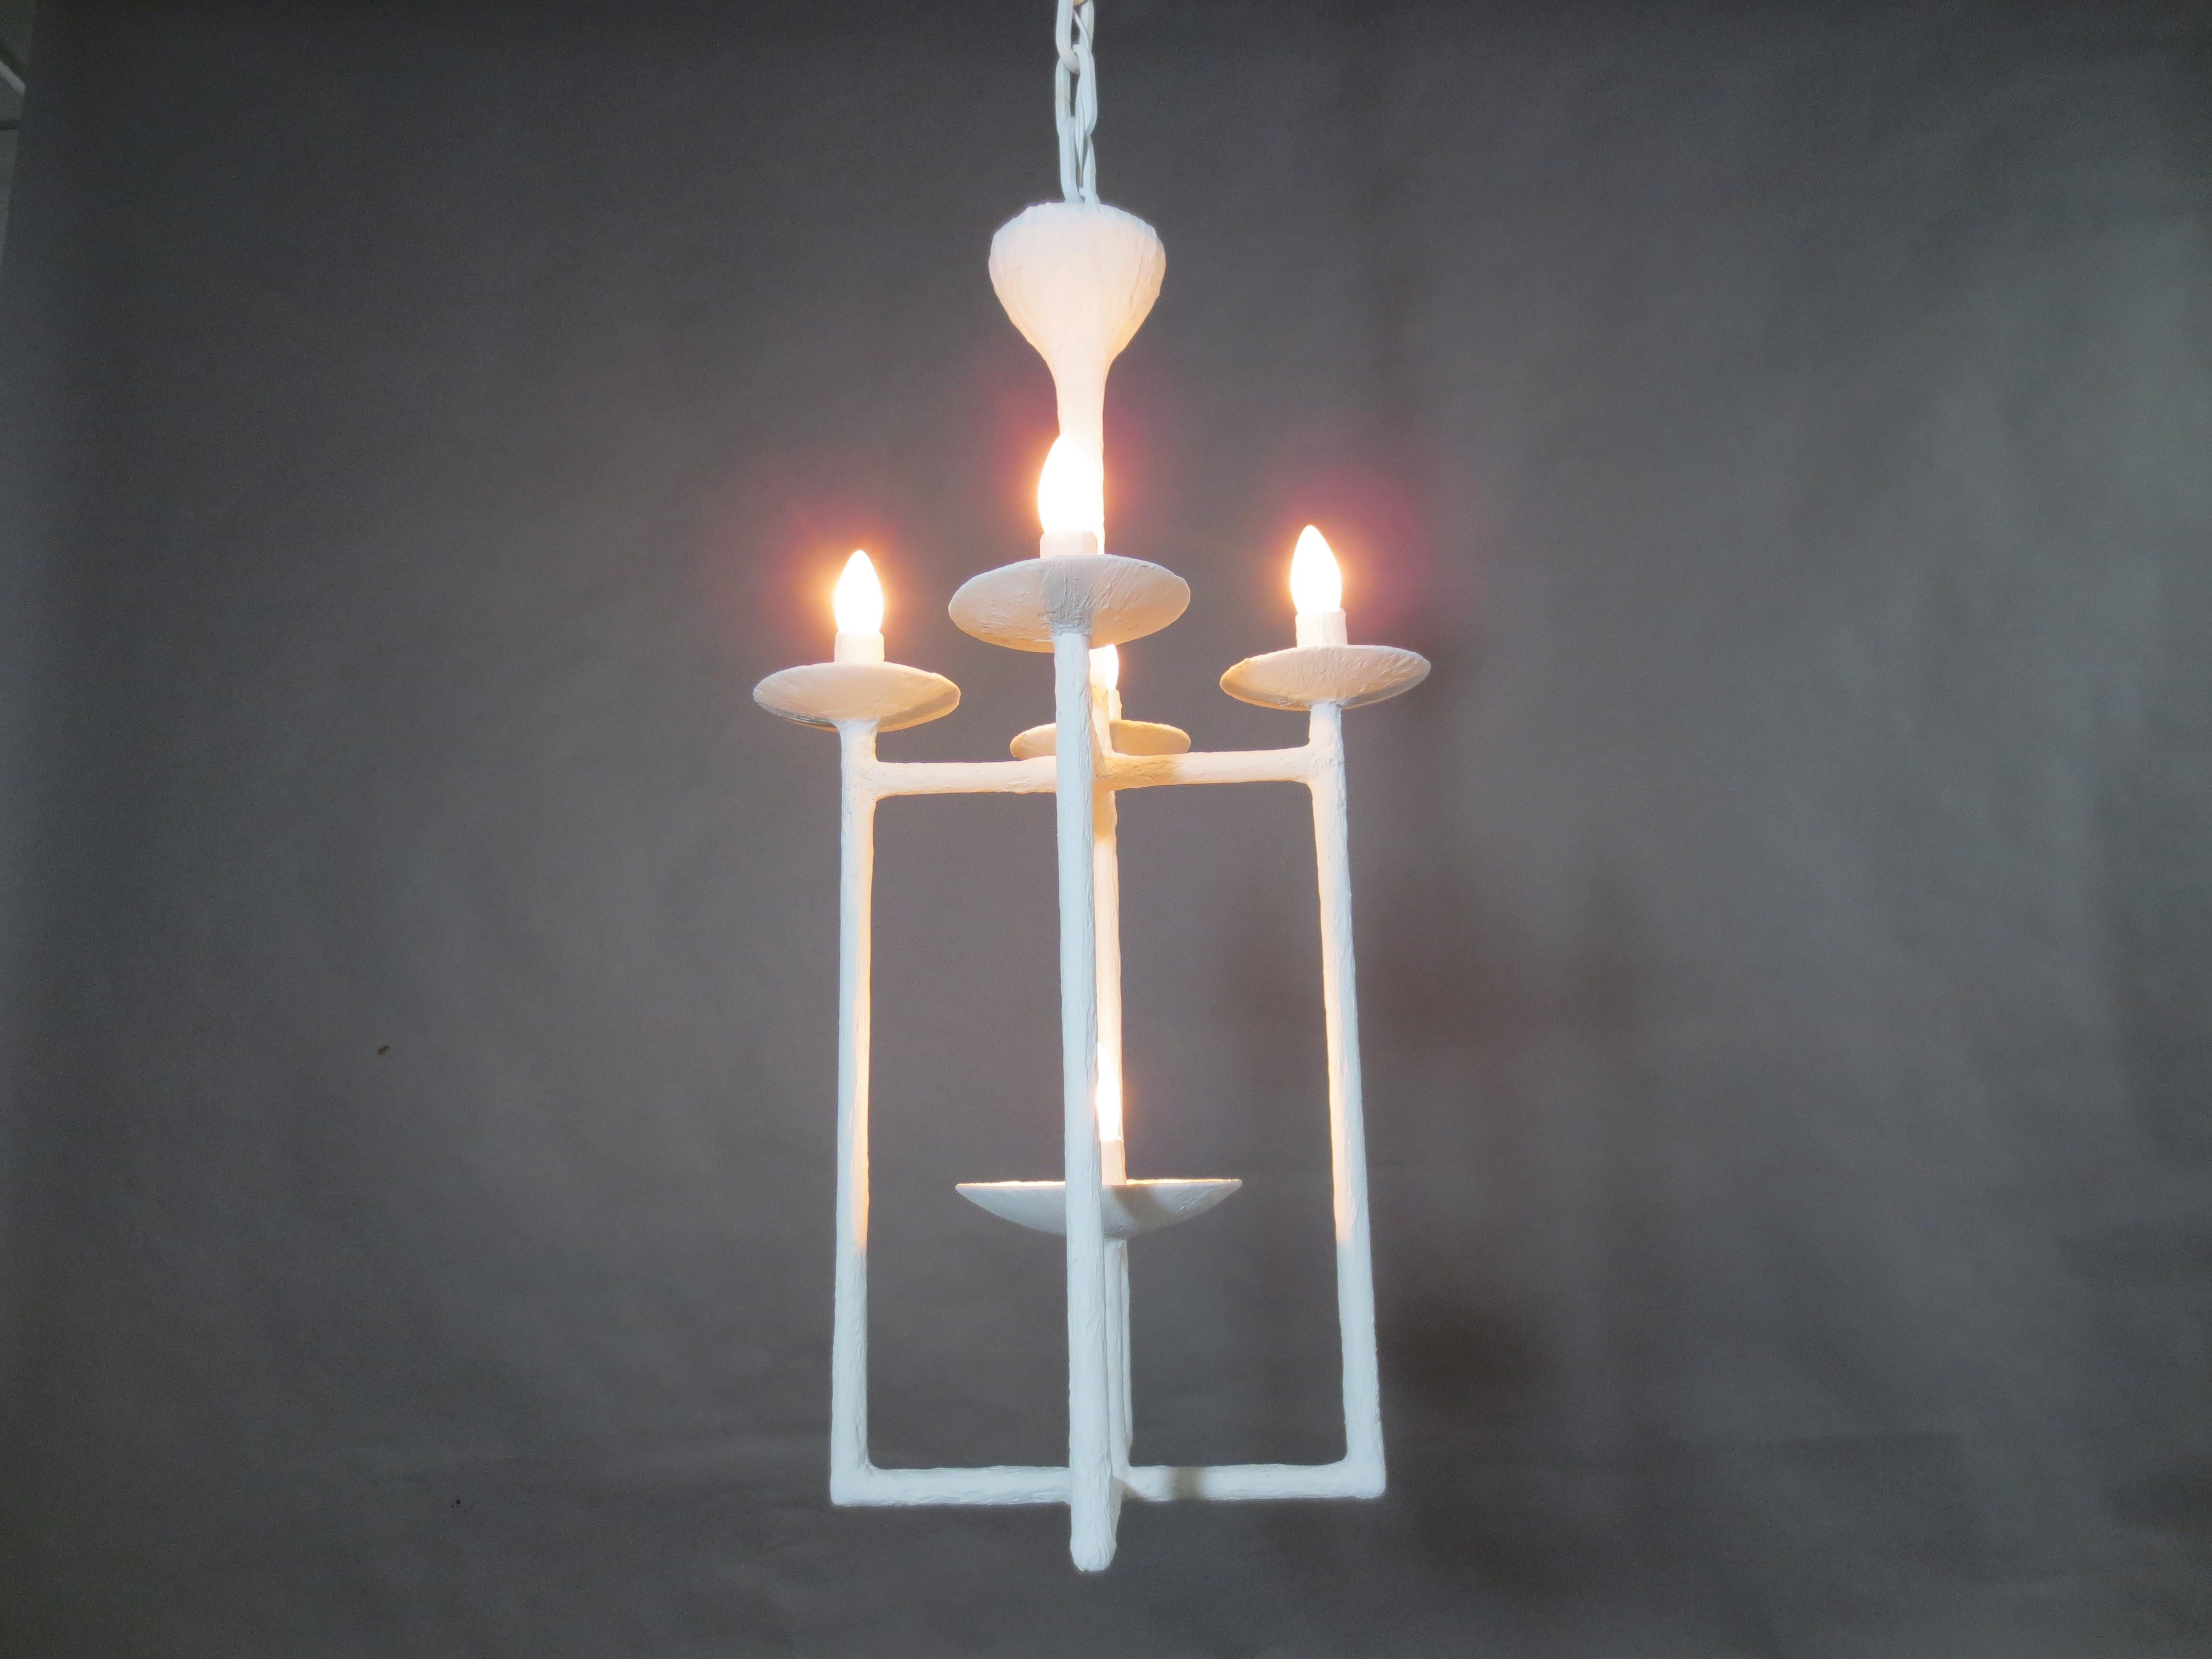 Plaster Lantern White Finish Chandelier By Tracey Garet for Apsara Interior

5 Light lantern/ pendant style chandelier. 4 Small bobeche on lantern edges and one central larger cup extending from crossbar at the base. Can be ceiling light or